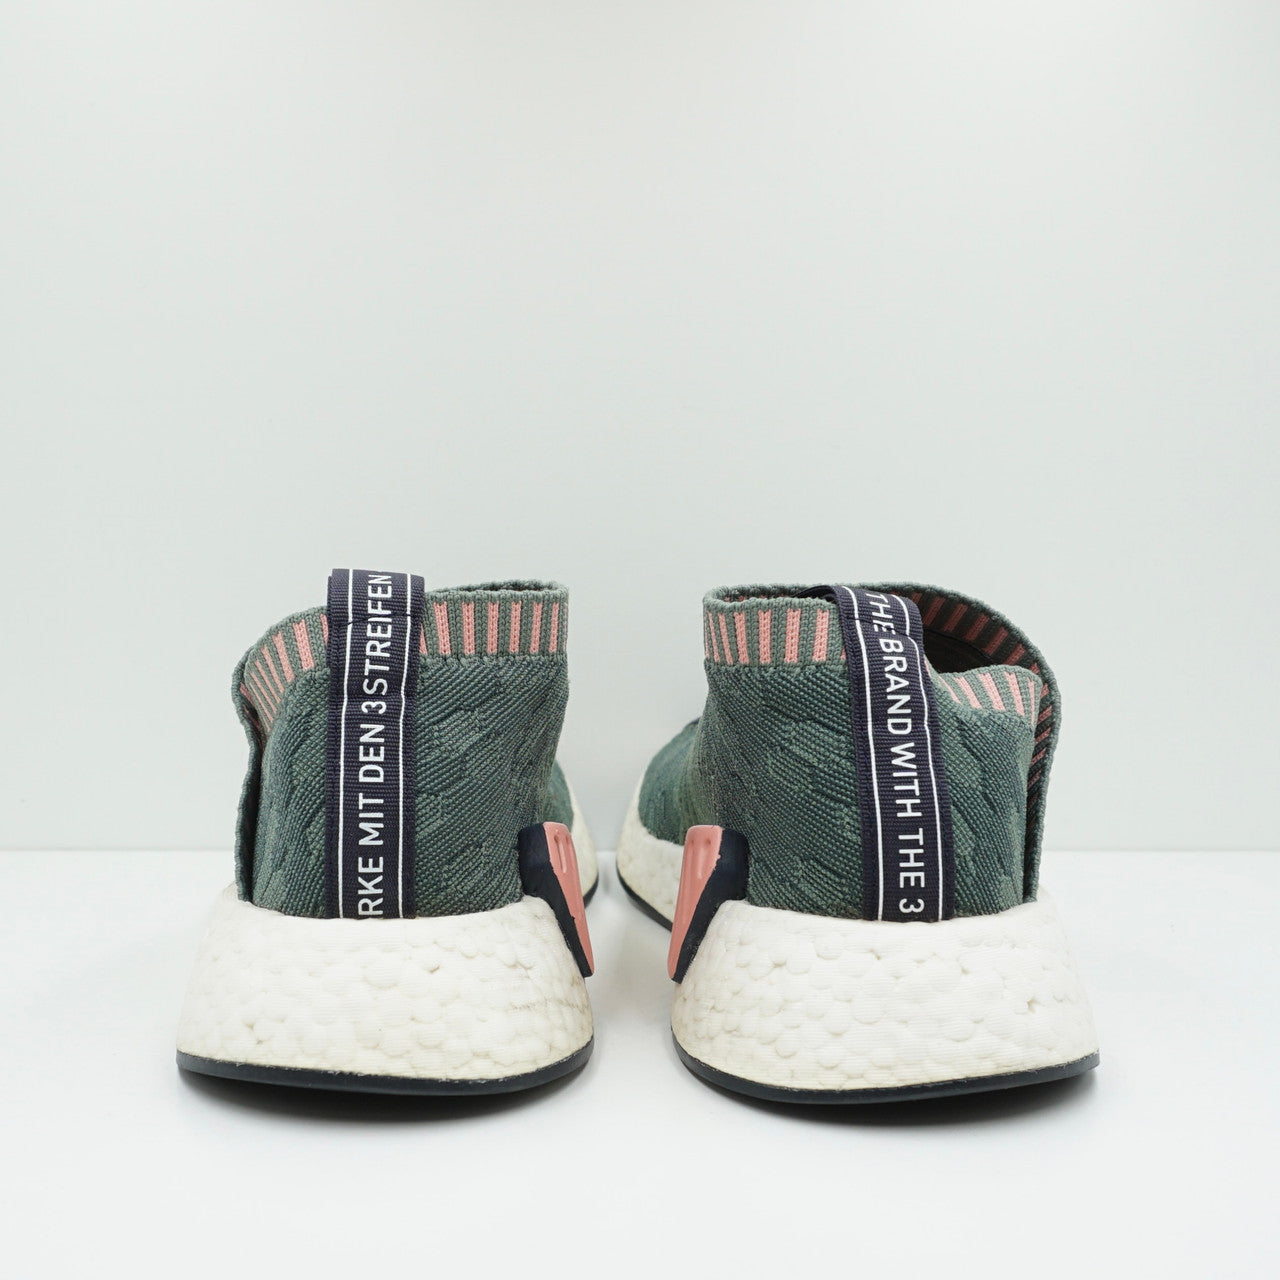 Adidas NMD CS2 Trace Green Trace Pink (W)